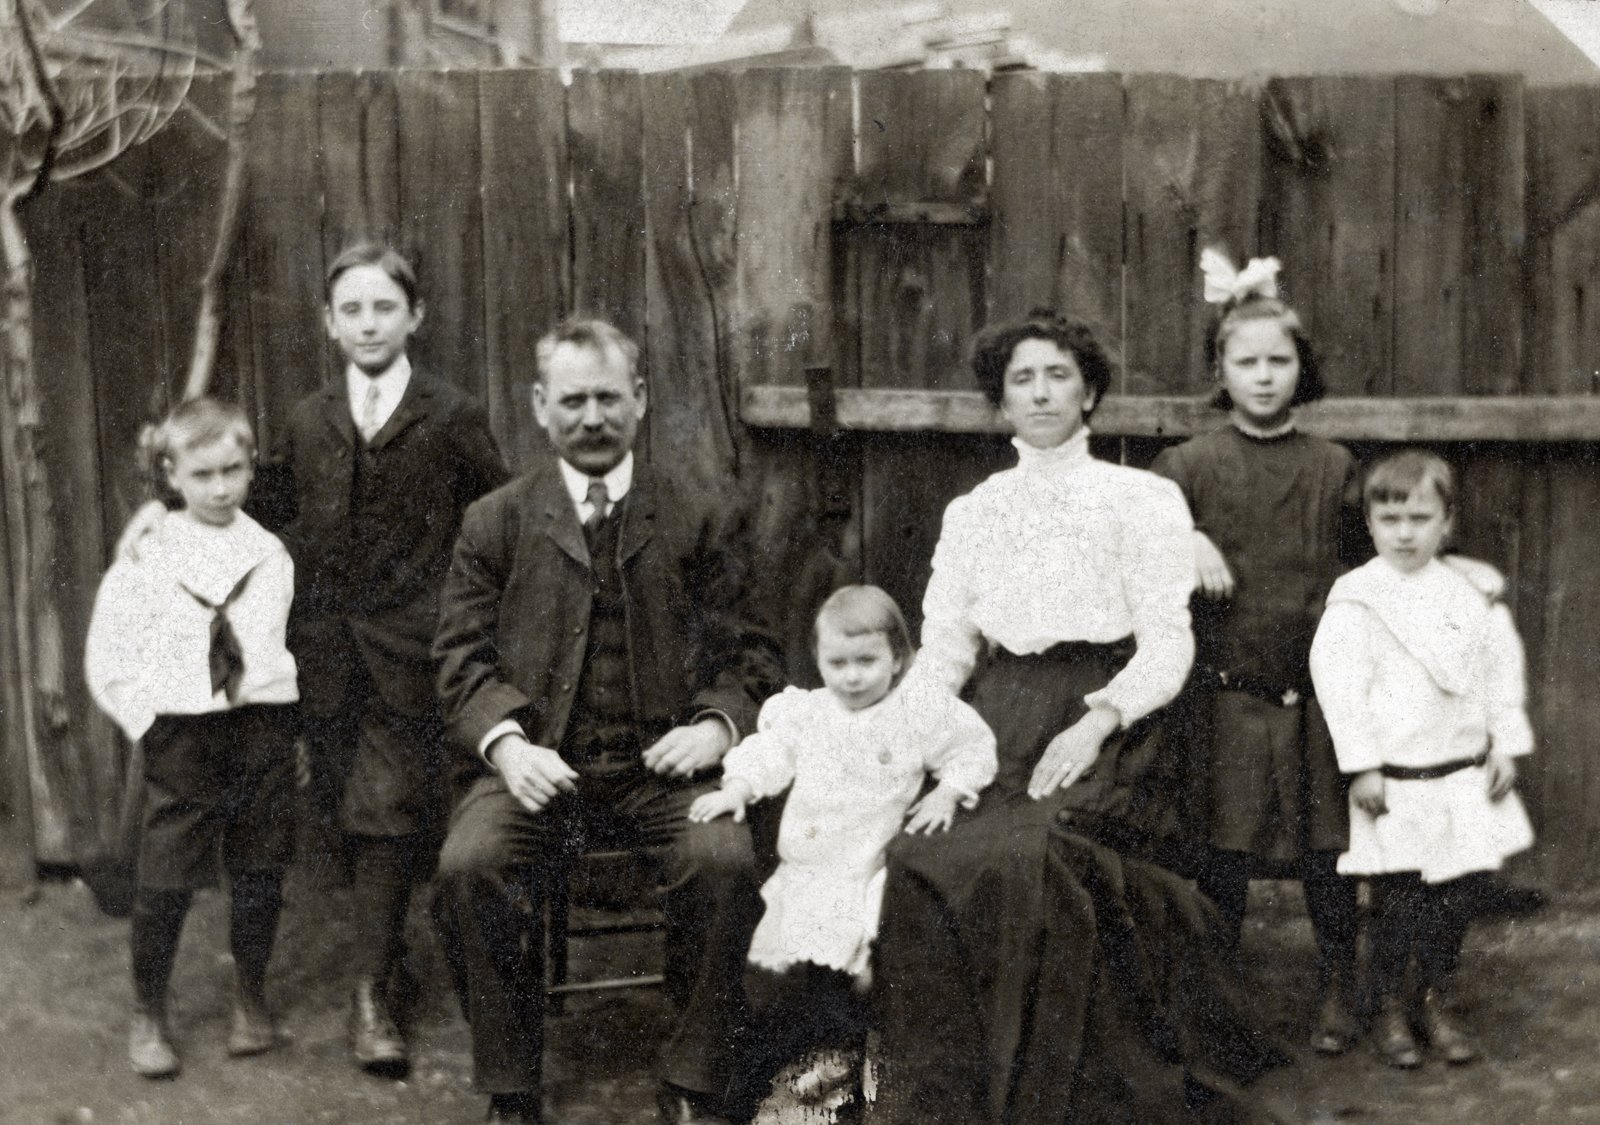 A portrait of the Shea family taken in their backyard in the St. Henri neighbourhood of Montreal, c. 1910.